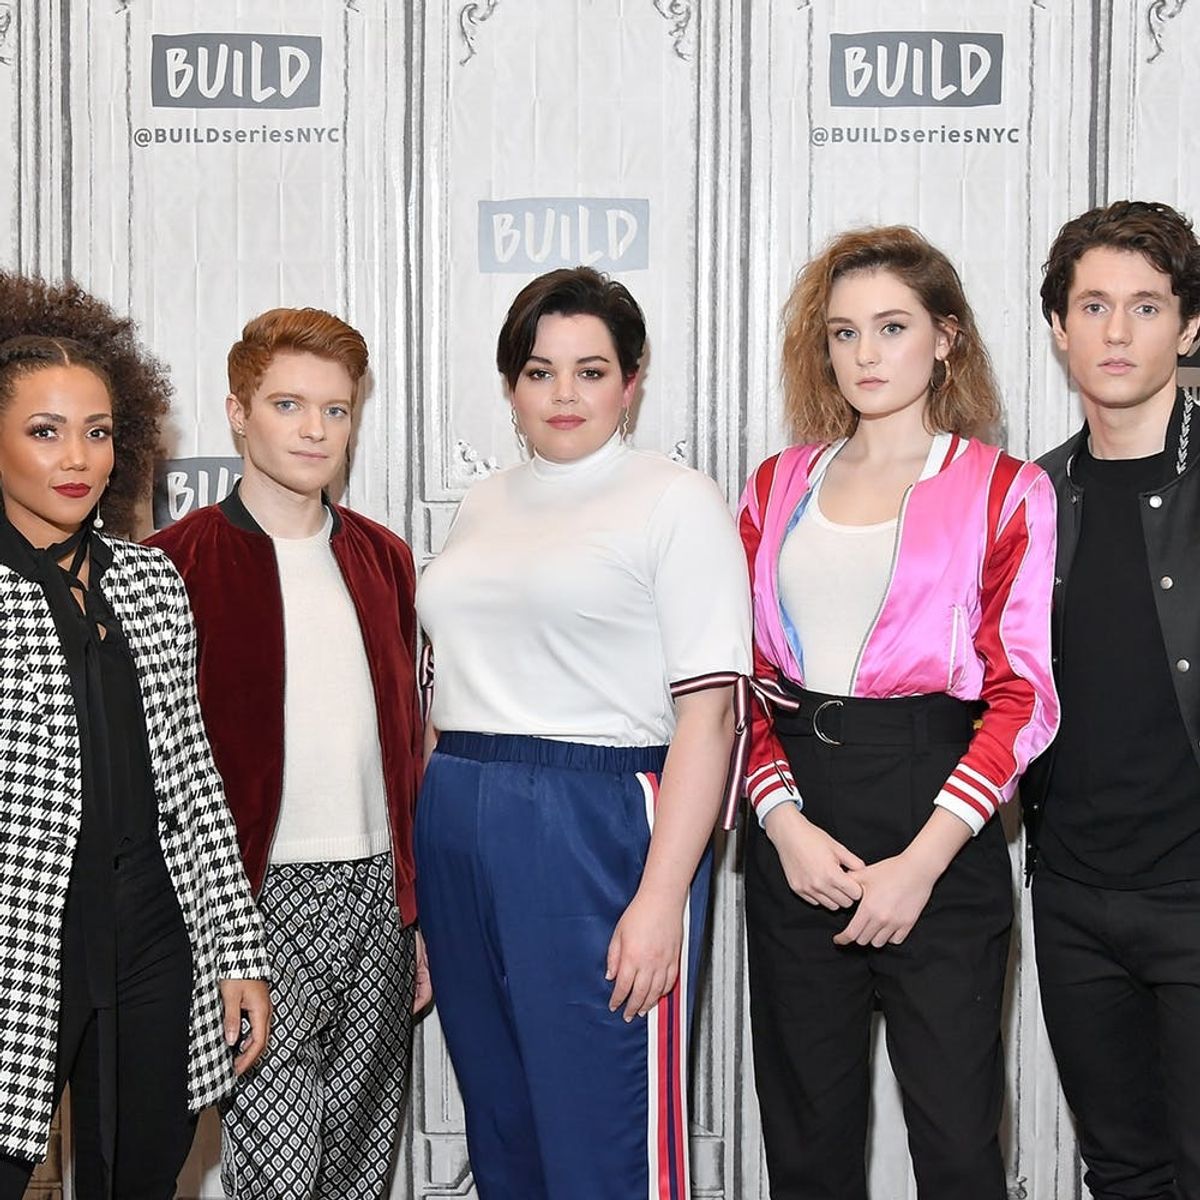 The ‘Heathers’ Reboot Has Been Cancelled in the Wake of Multiple School Shootings